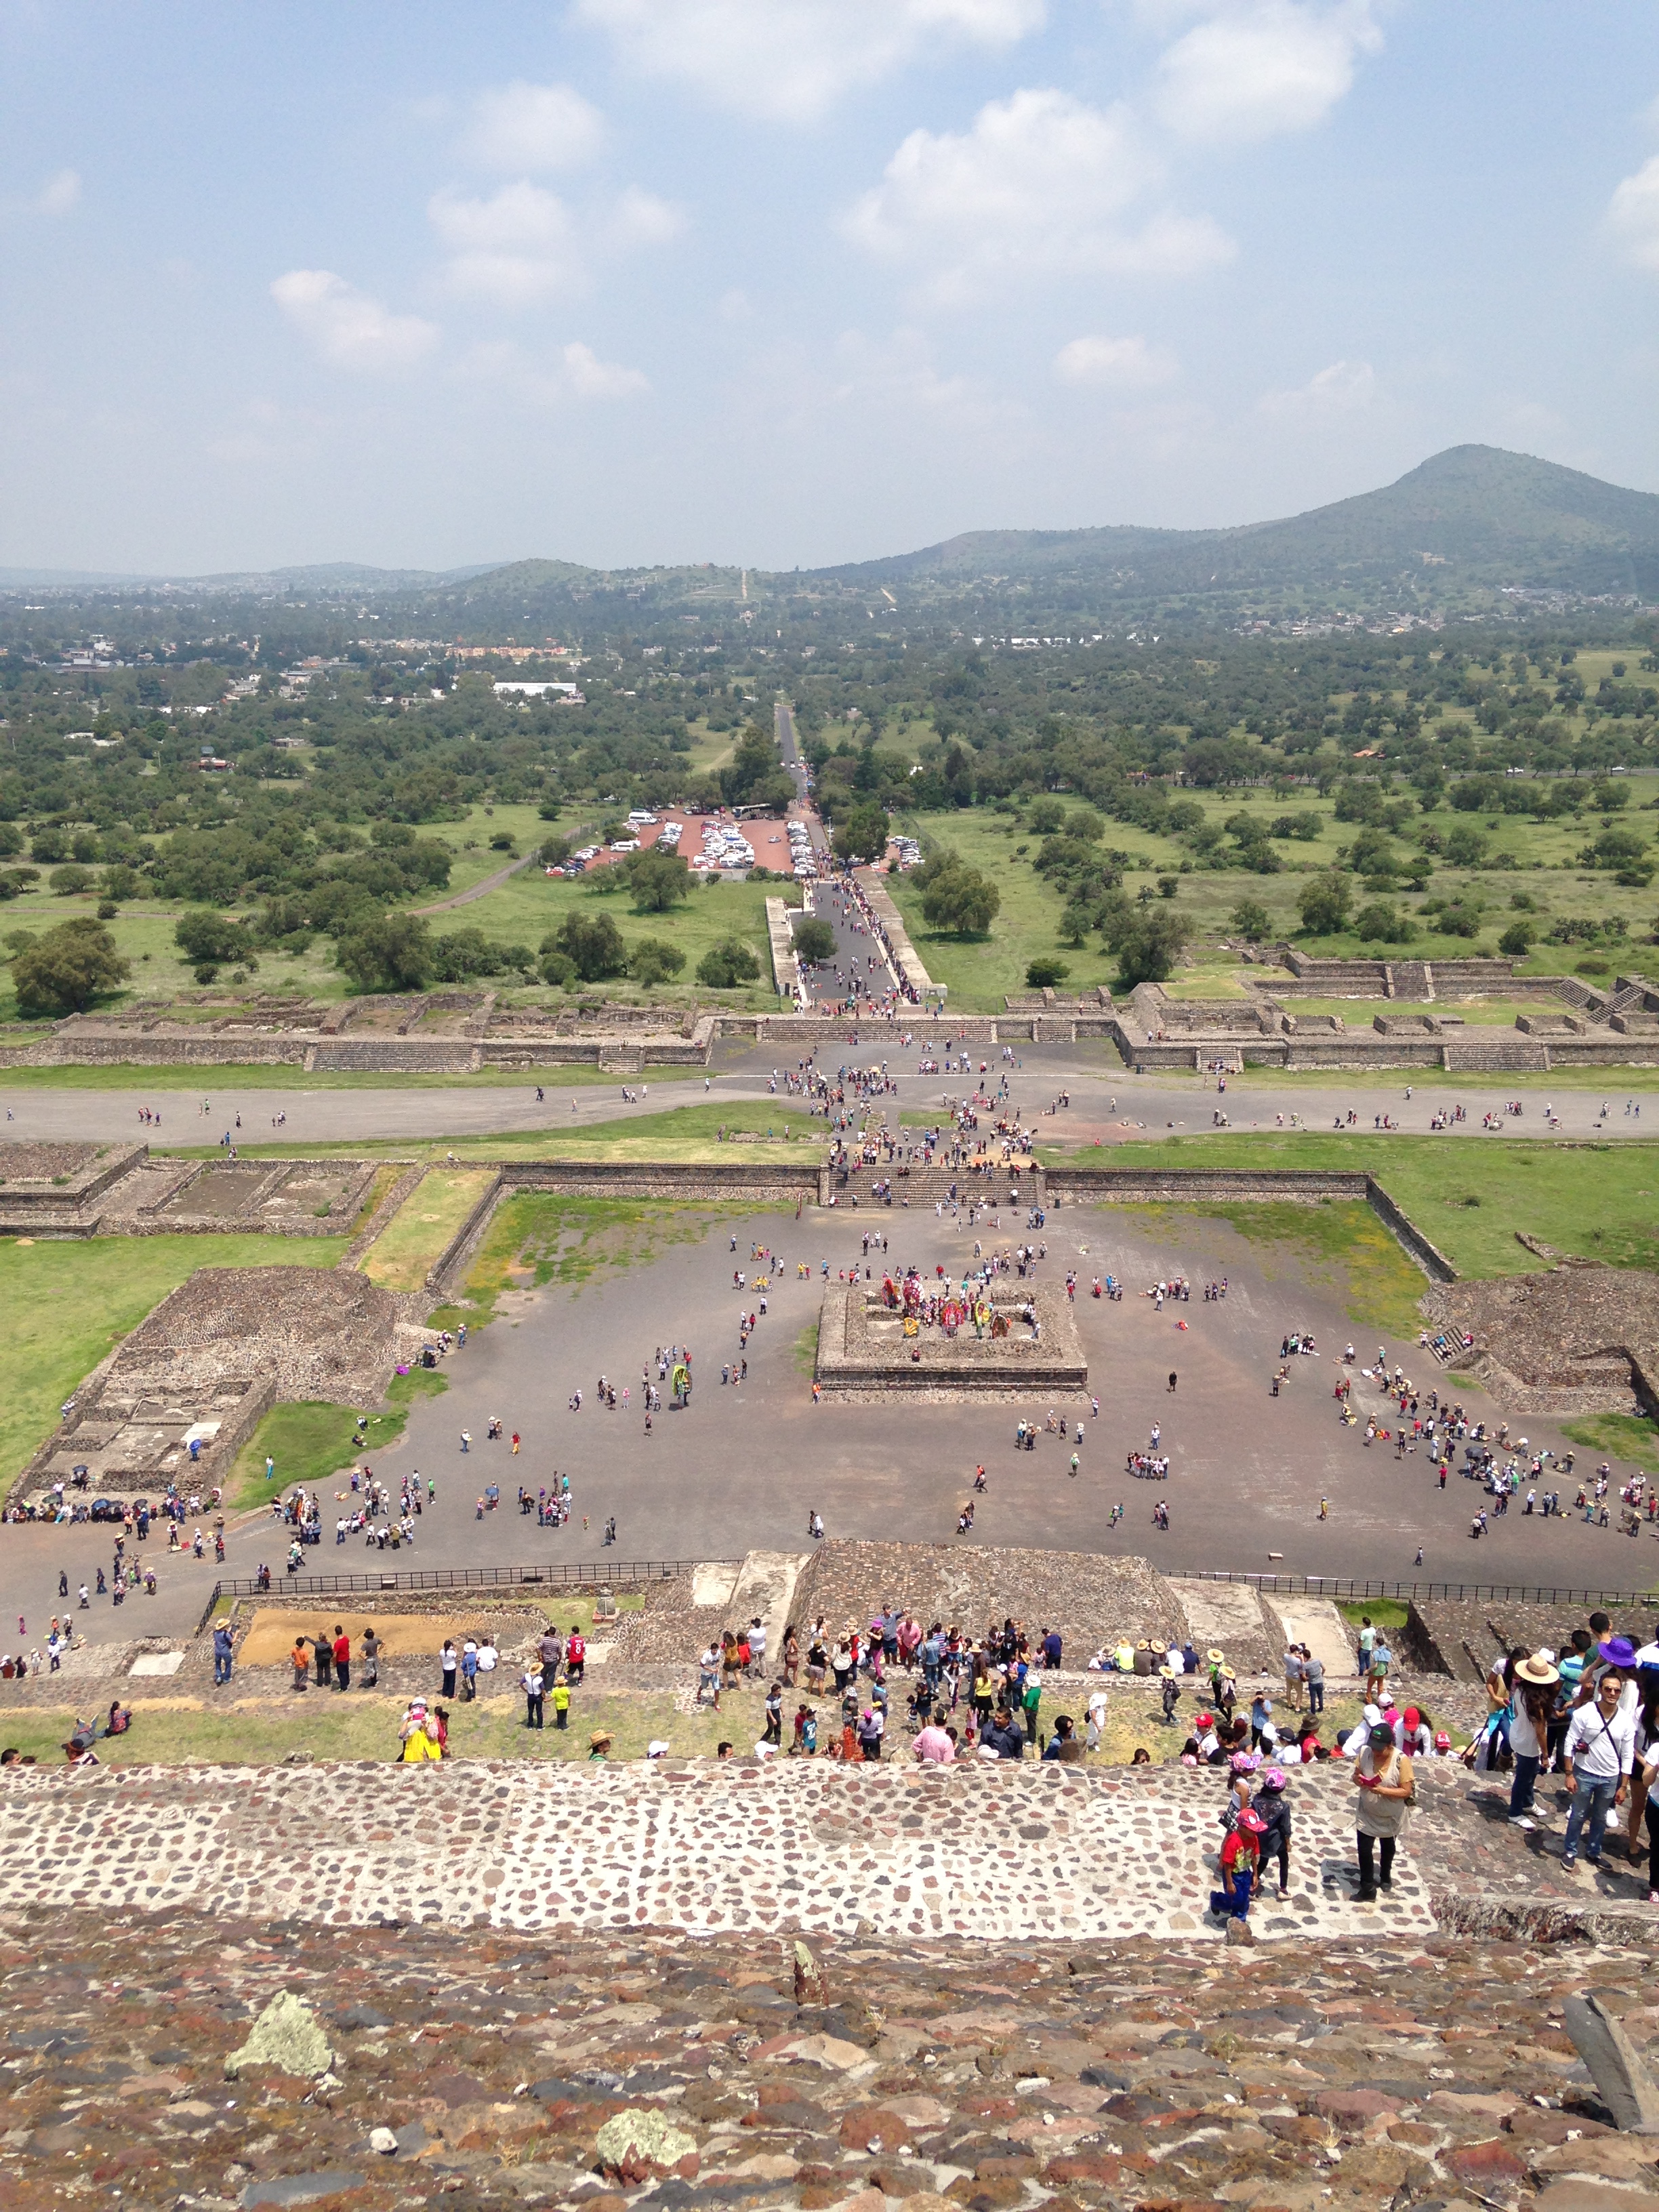 On top of the Pyramid of the Sun in Teotihuacan, Mexico.jpg